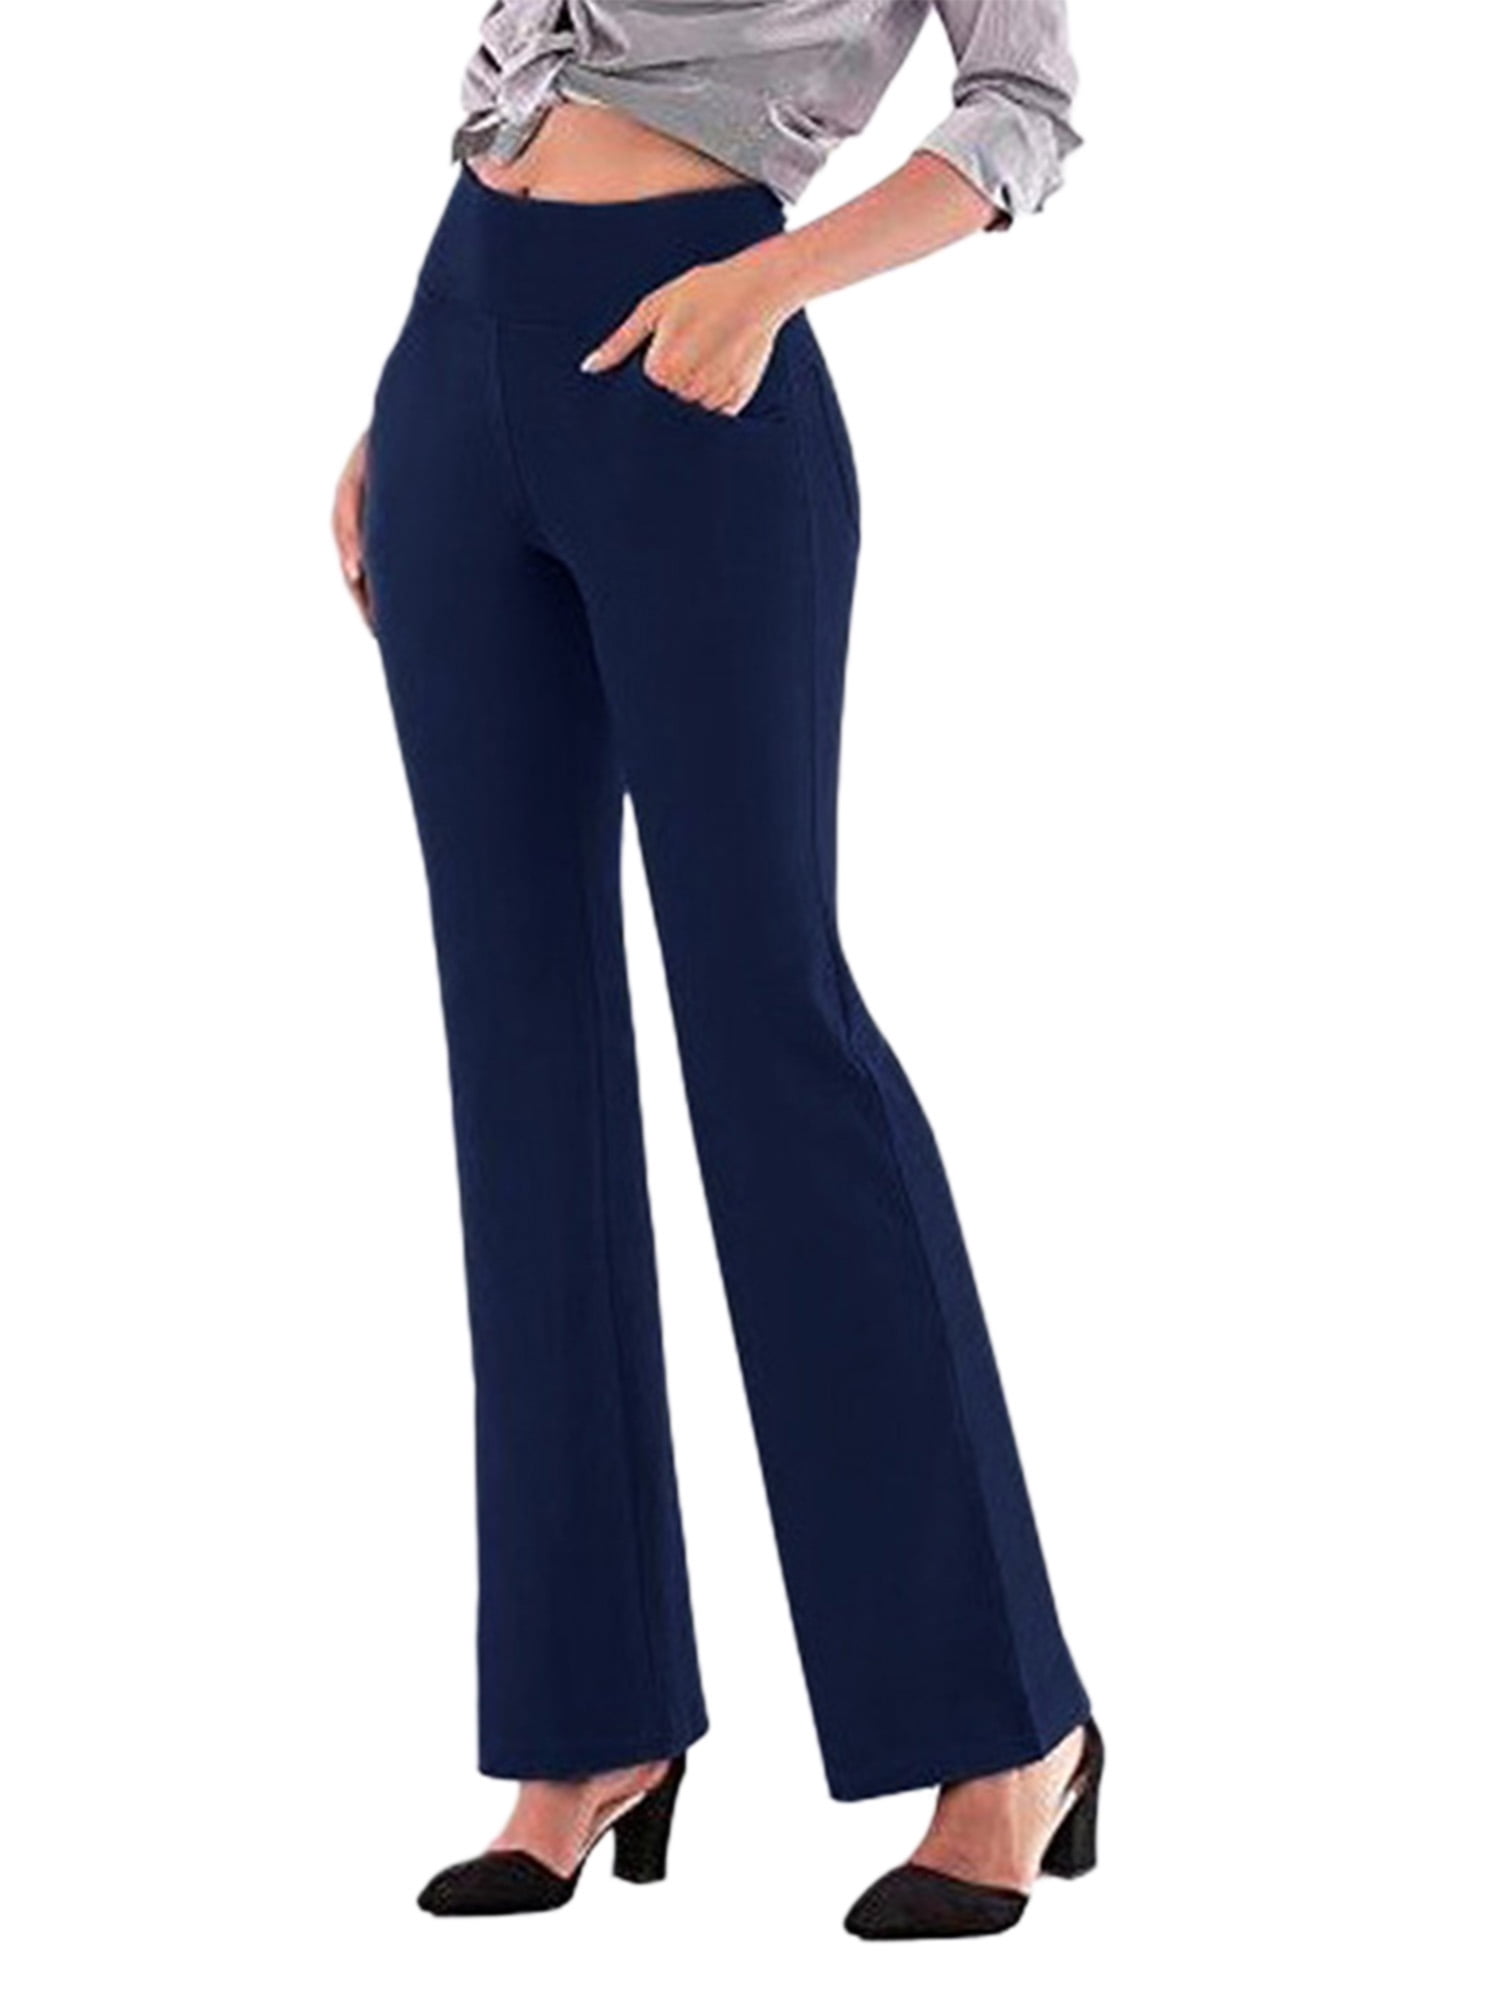 Women's Wide Leg Pants Elastic High Waisted Business Work Suit Trousers  Pants | eBay